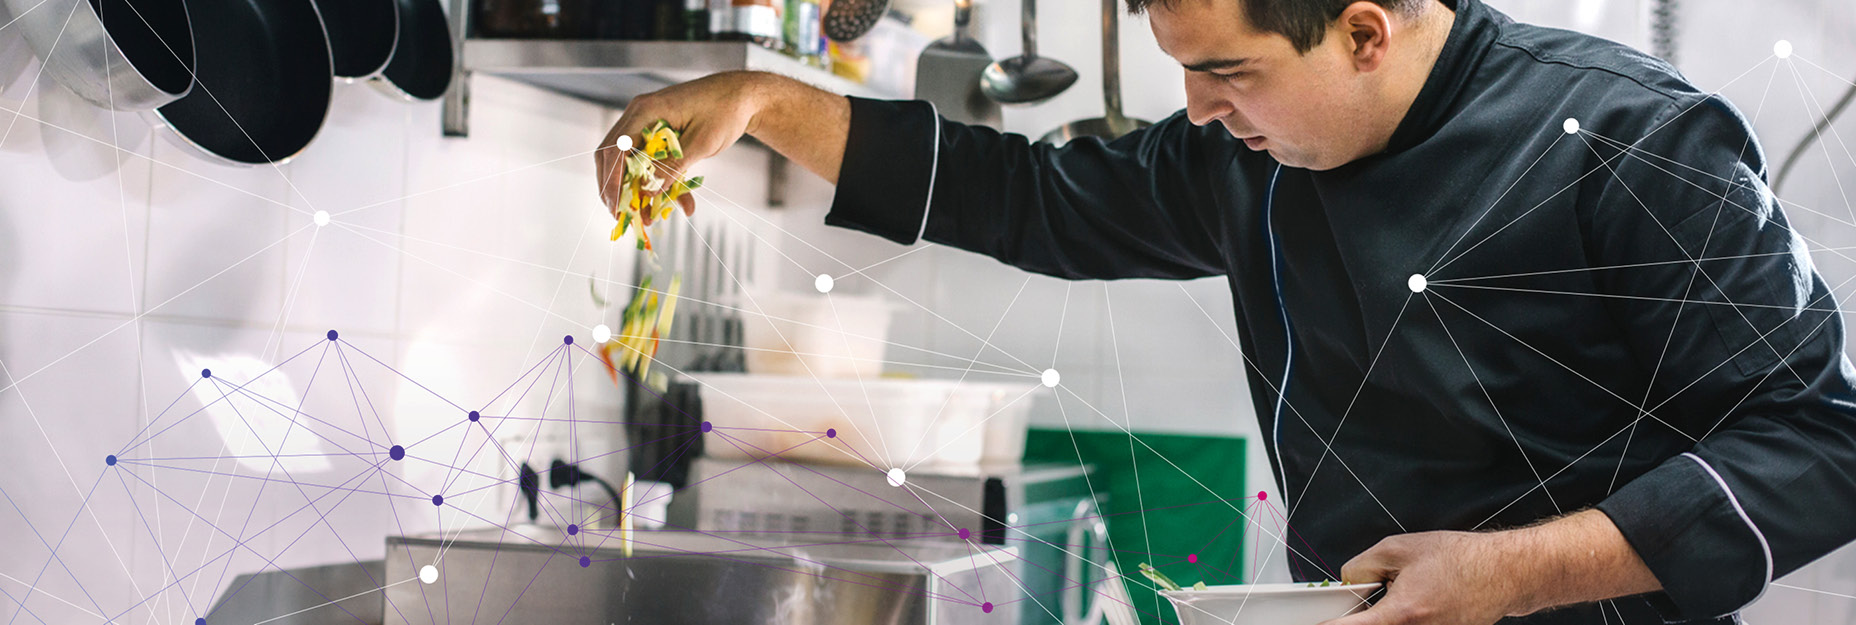 5 food waste problems in commercial kitchens and how to overcome them